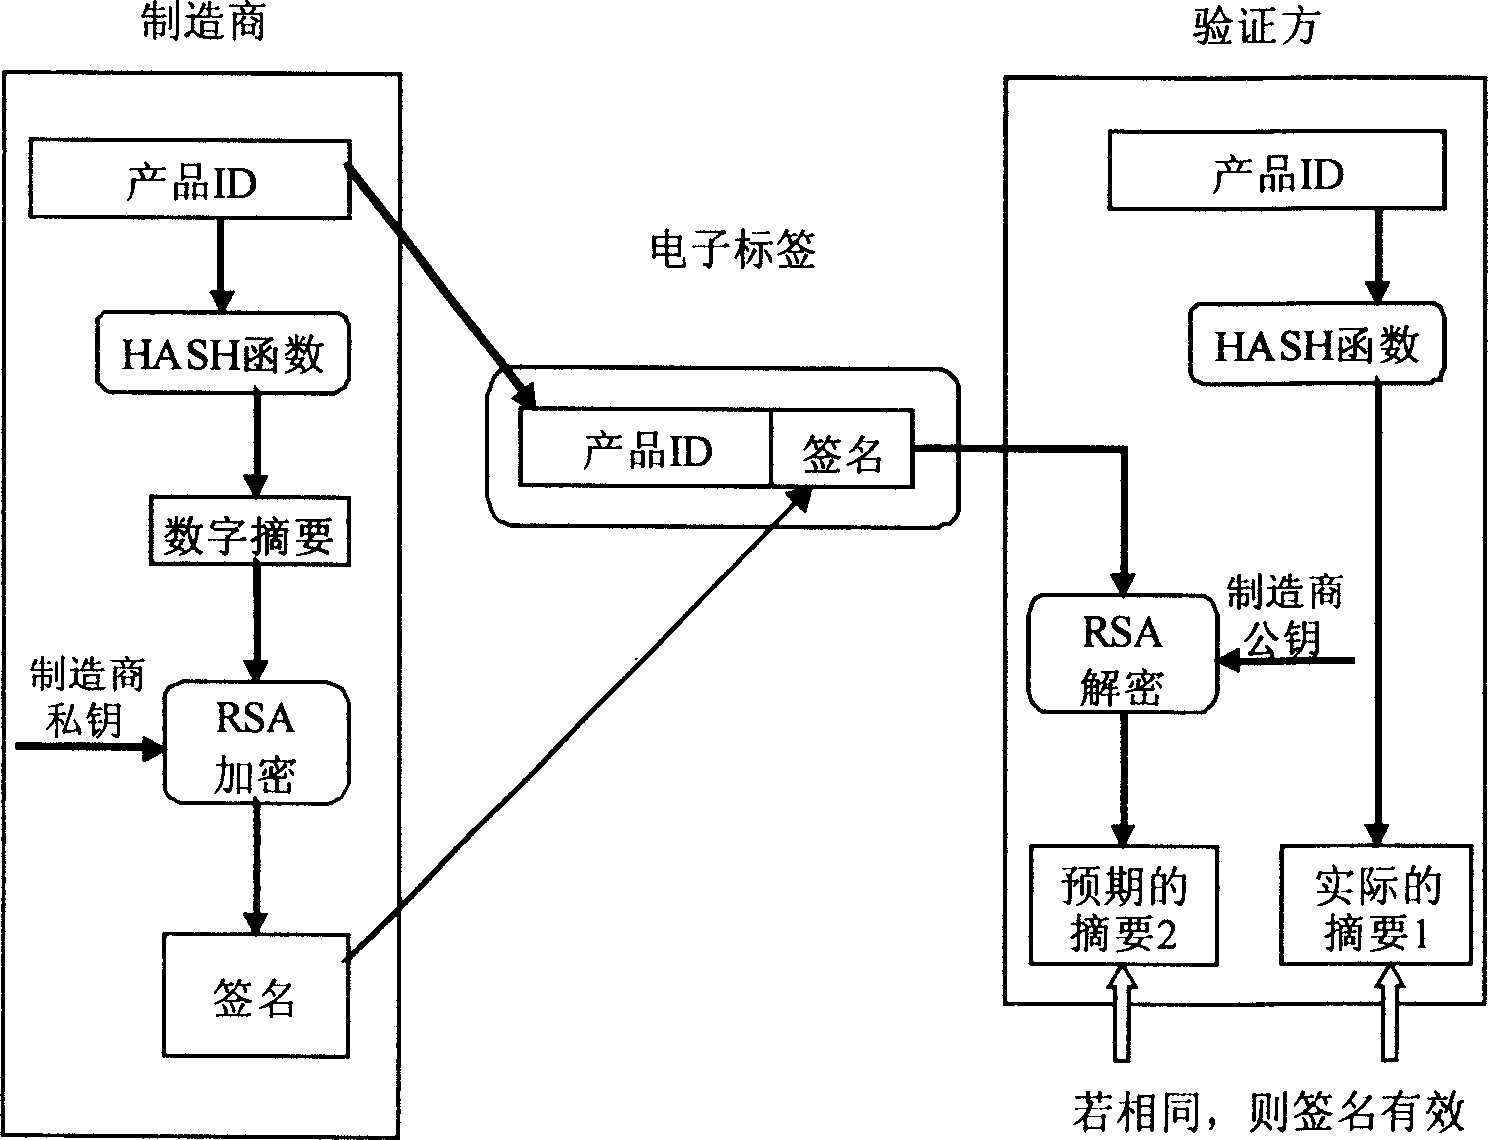 Method for anti false verification based on identification technique in radio frequency, and anti false system